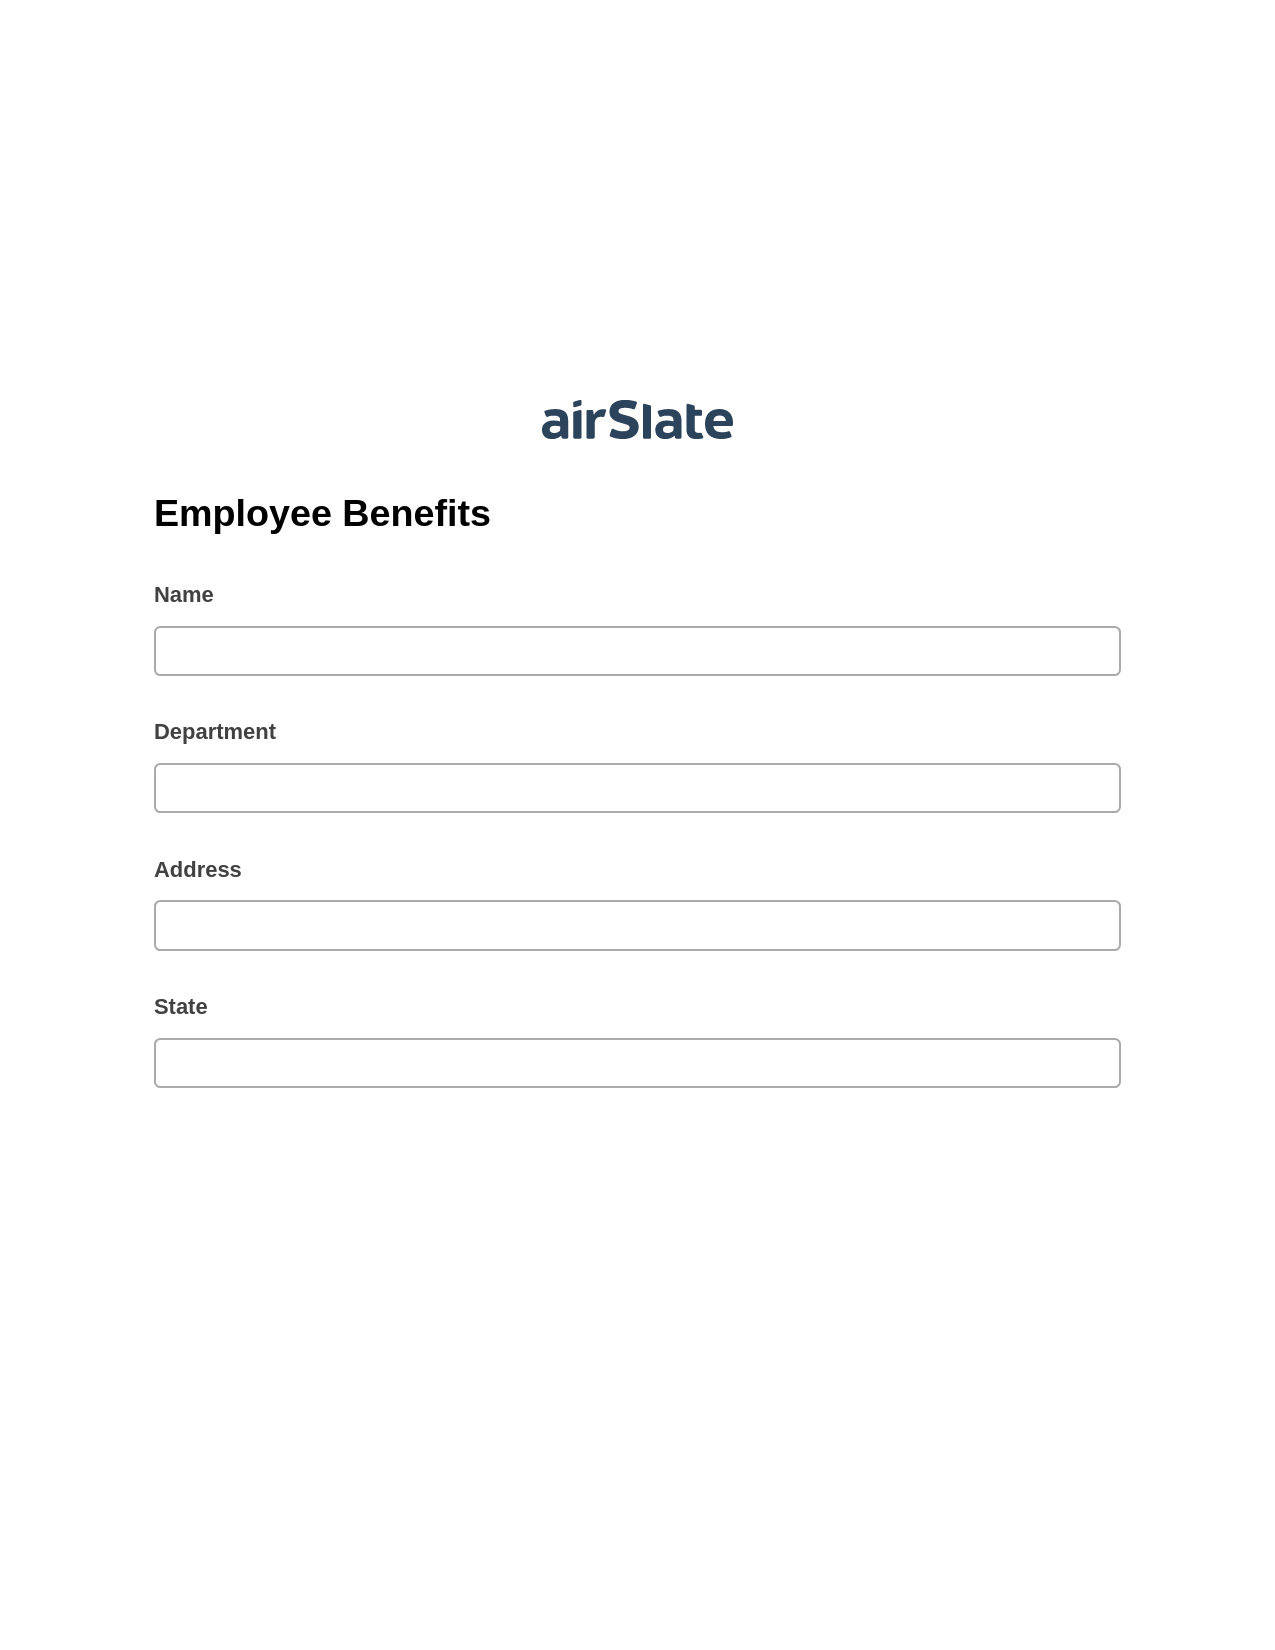 Employee Benefits Pre-fill from Salesforce Record Bot, Remove Slate Bot, Export to Excel 365 Bot